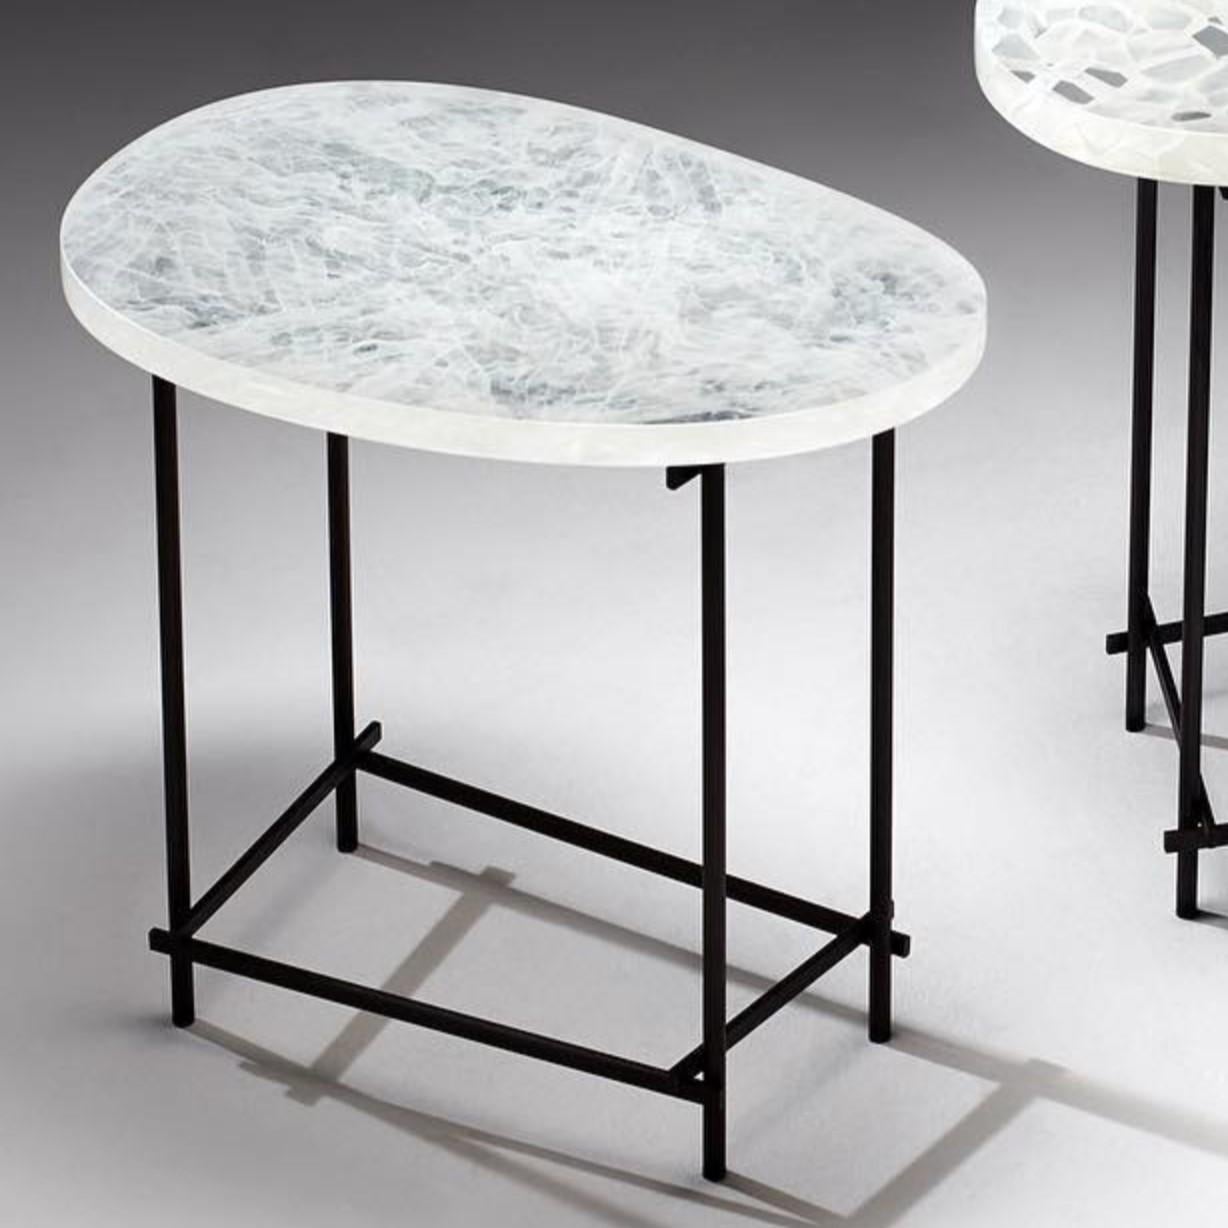 Small Stix Table by The GoodMan Studio
Dimensions: W 36 x D 55 x H 50 cm
Materials: Metal, Steel, Temple Glass - Lattice

Kilncast Temple glass. Hand made and polished
Glass and Steel Table base.

The Goodman Studio has been internationally